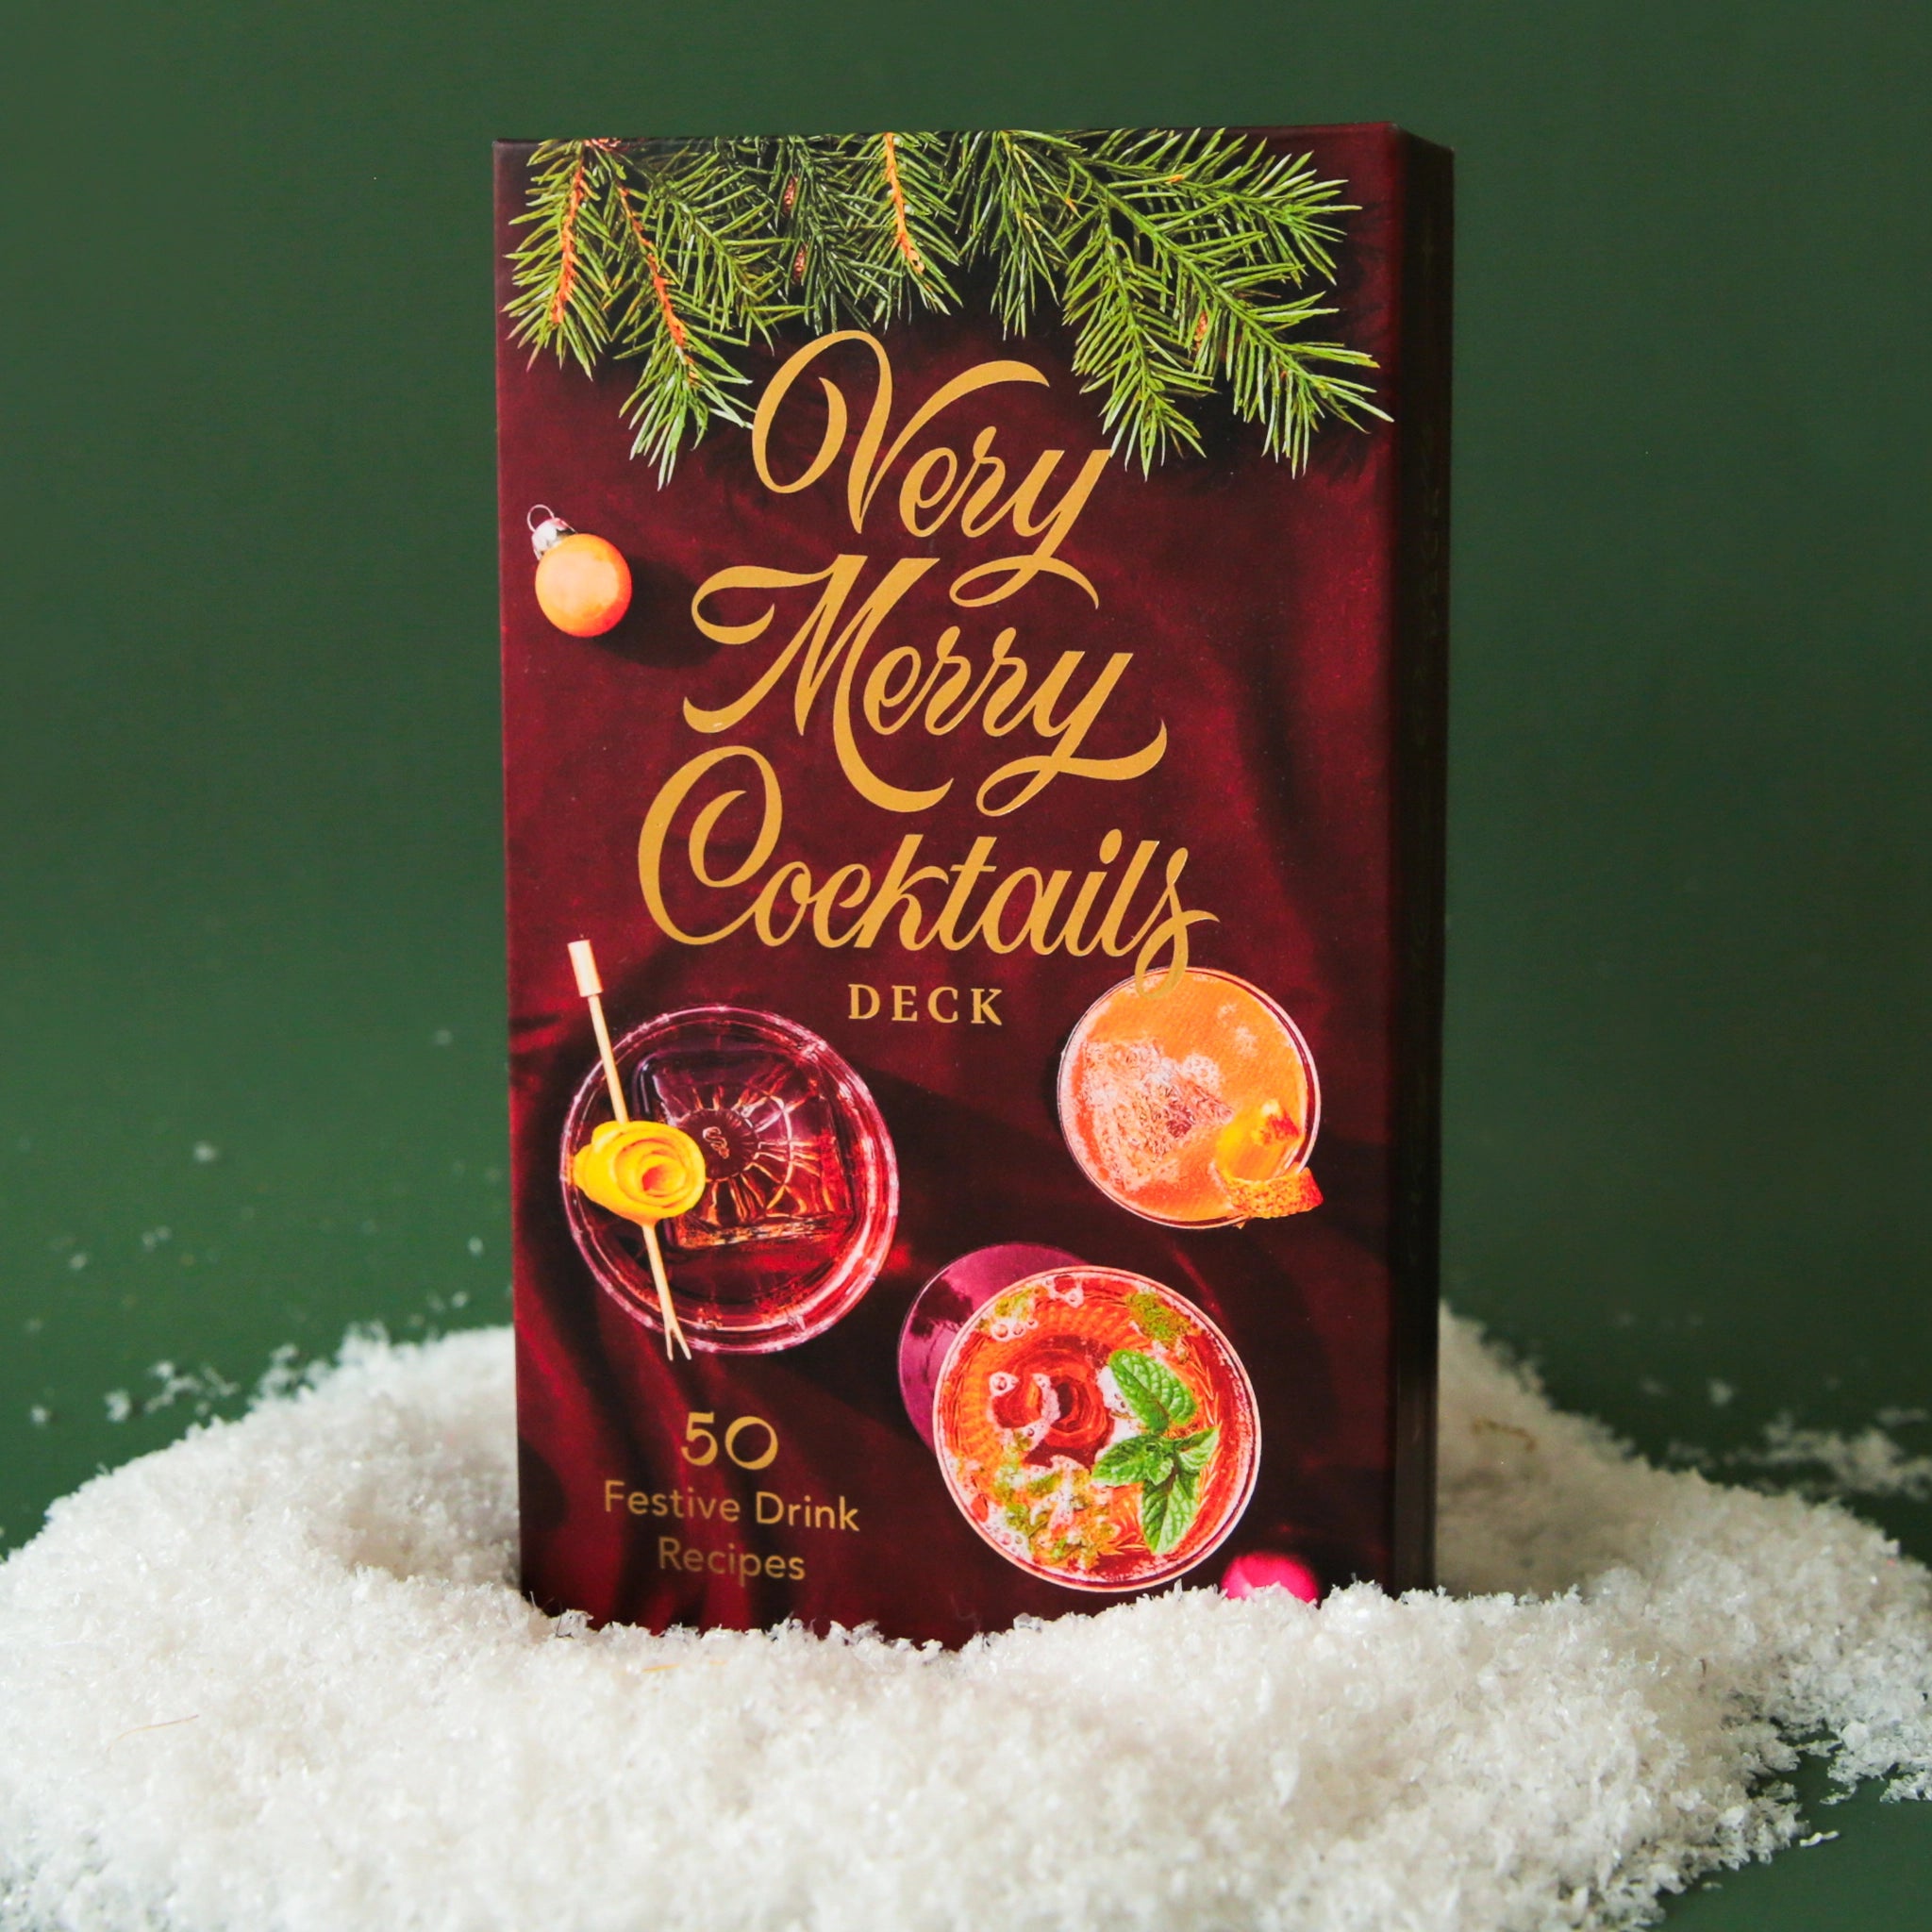 On a green snowy background is a deck of holiday cocktail recipe cards with festive photographs and yellow gold text on the front of the box that reads, "Very Merry Cocktails Deck".